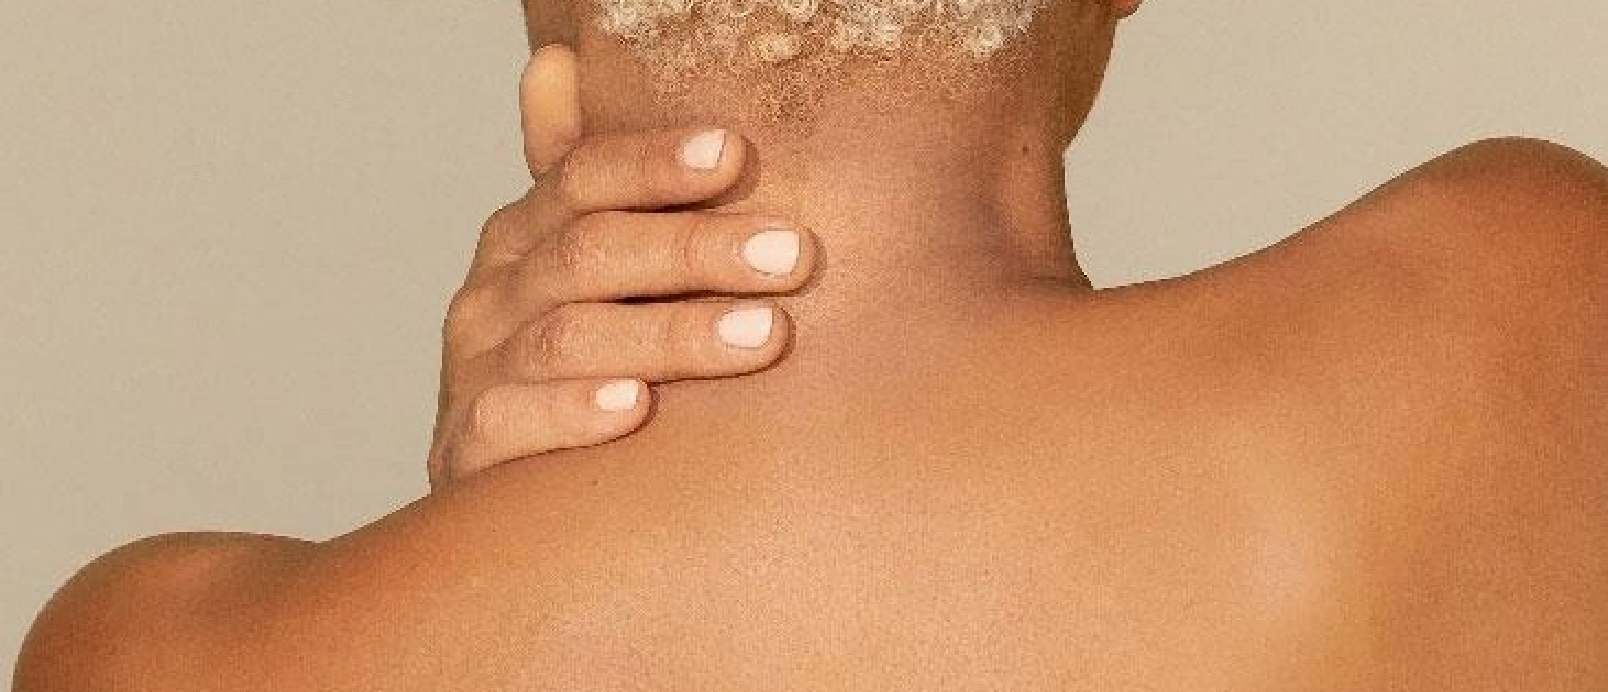 Skin Tone and Texture of Woman's Neck and Shoulders